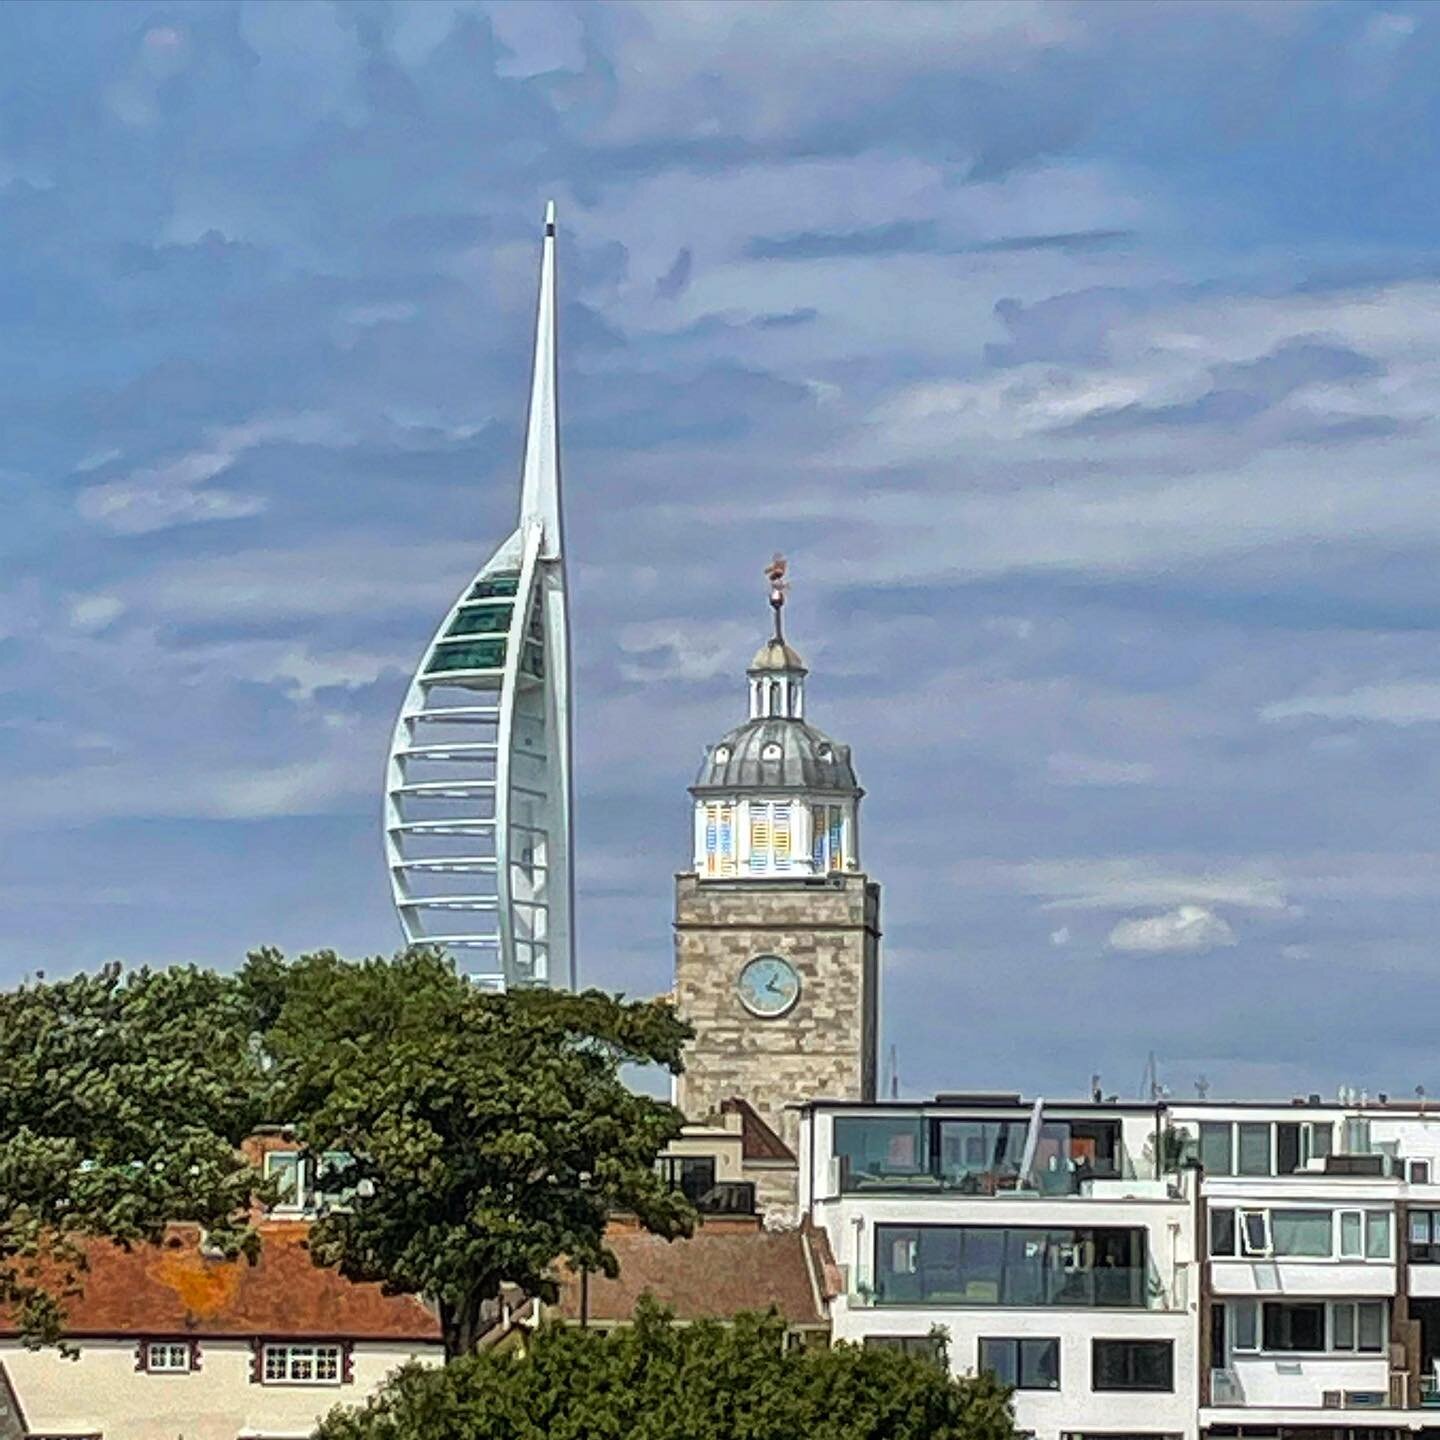 Towers new and old, overlooking #oldportsmouth from #southsea.

.
.
.
#portsmouthcathedral #portsmouth #churchofengland #cathedralsofinstagram #pompey #cathedralofthesea #cathedral #church #worship #god #heritage #englishcathedrals #portsmouthhistory